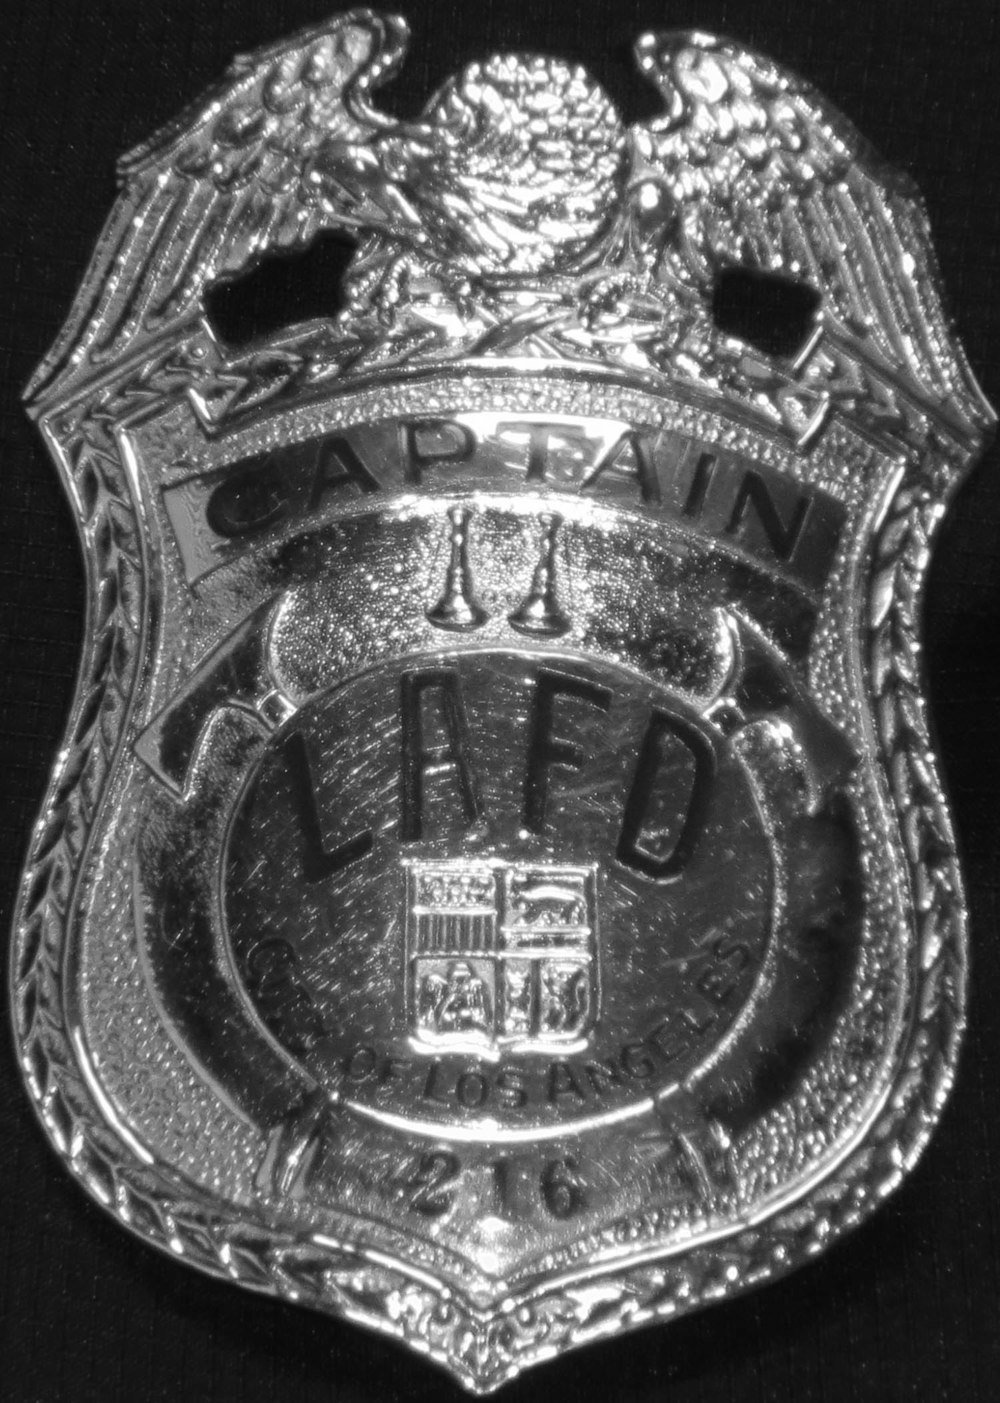  LAFD Badge, Photograph courtesy of the LAFD 